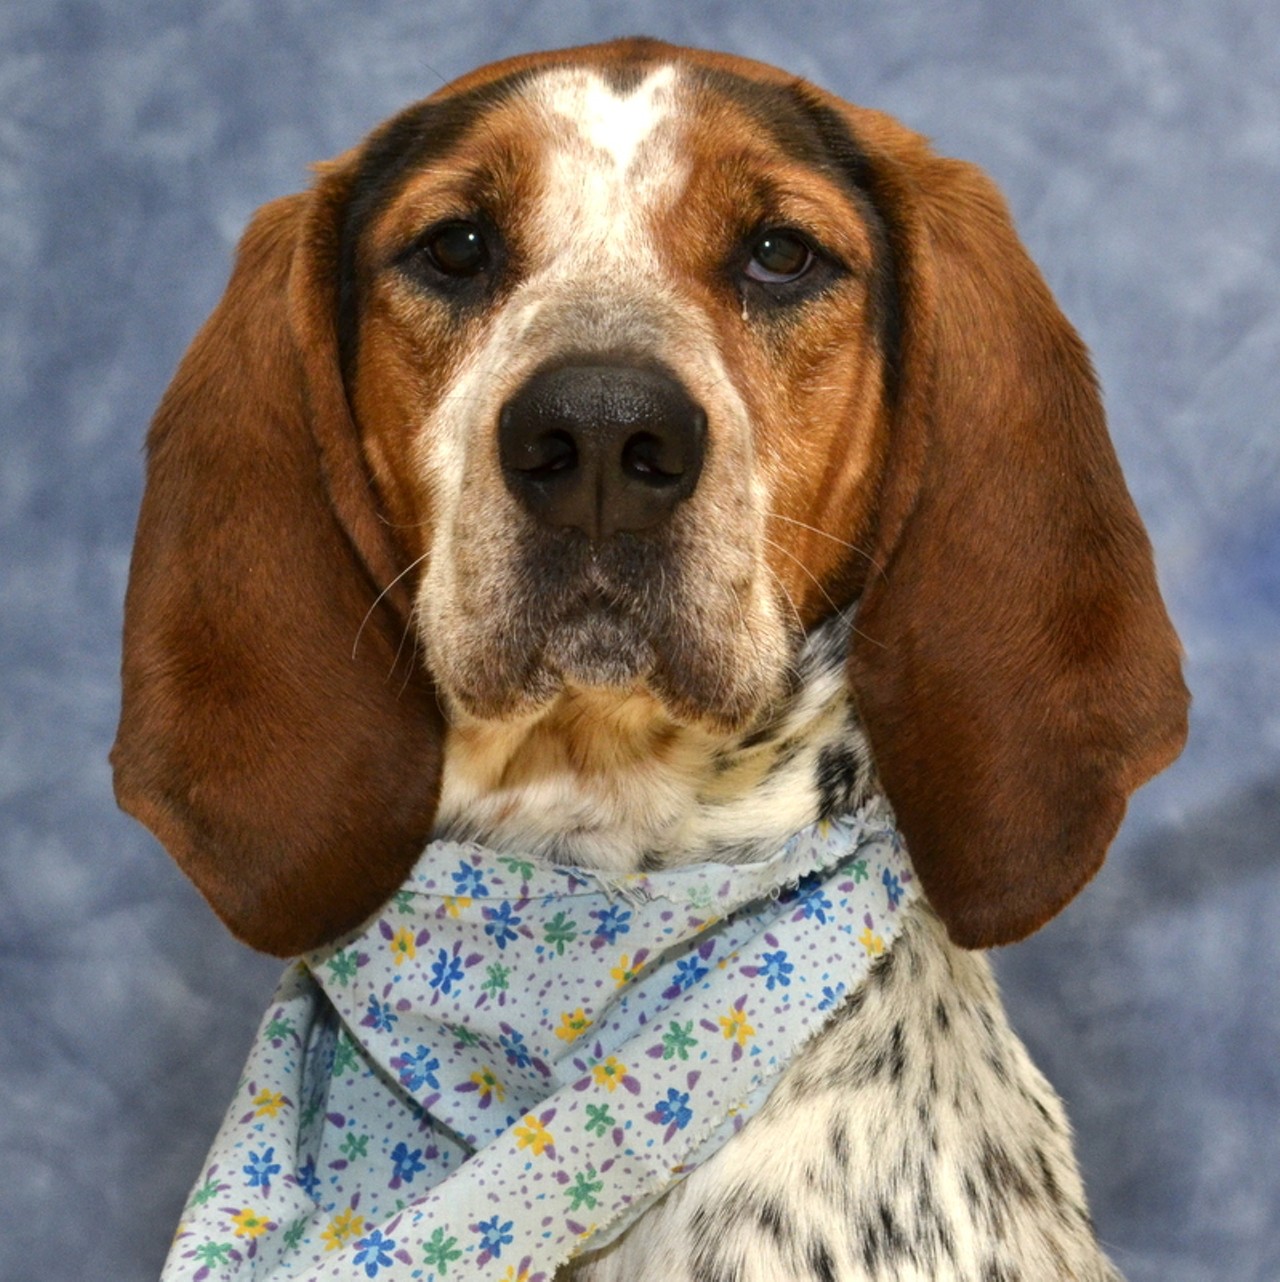 NAME: Diva
GENDER: Female
BREED: Coonhound
AGE: 3 years, 1 month
WEIGHT: 62 pounds
SPECIAL CONSIDERATIONS: None
REASON I CAME TO MHS: Agency transfer
LOCATION: Berman Center for Animal Care